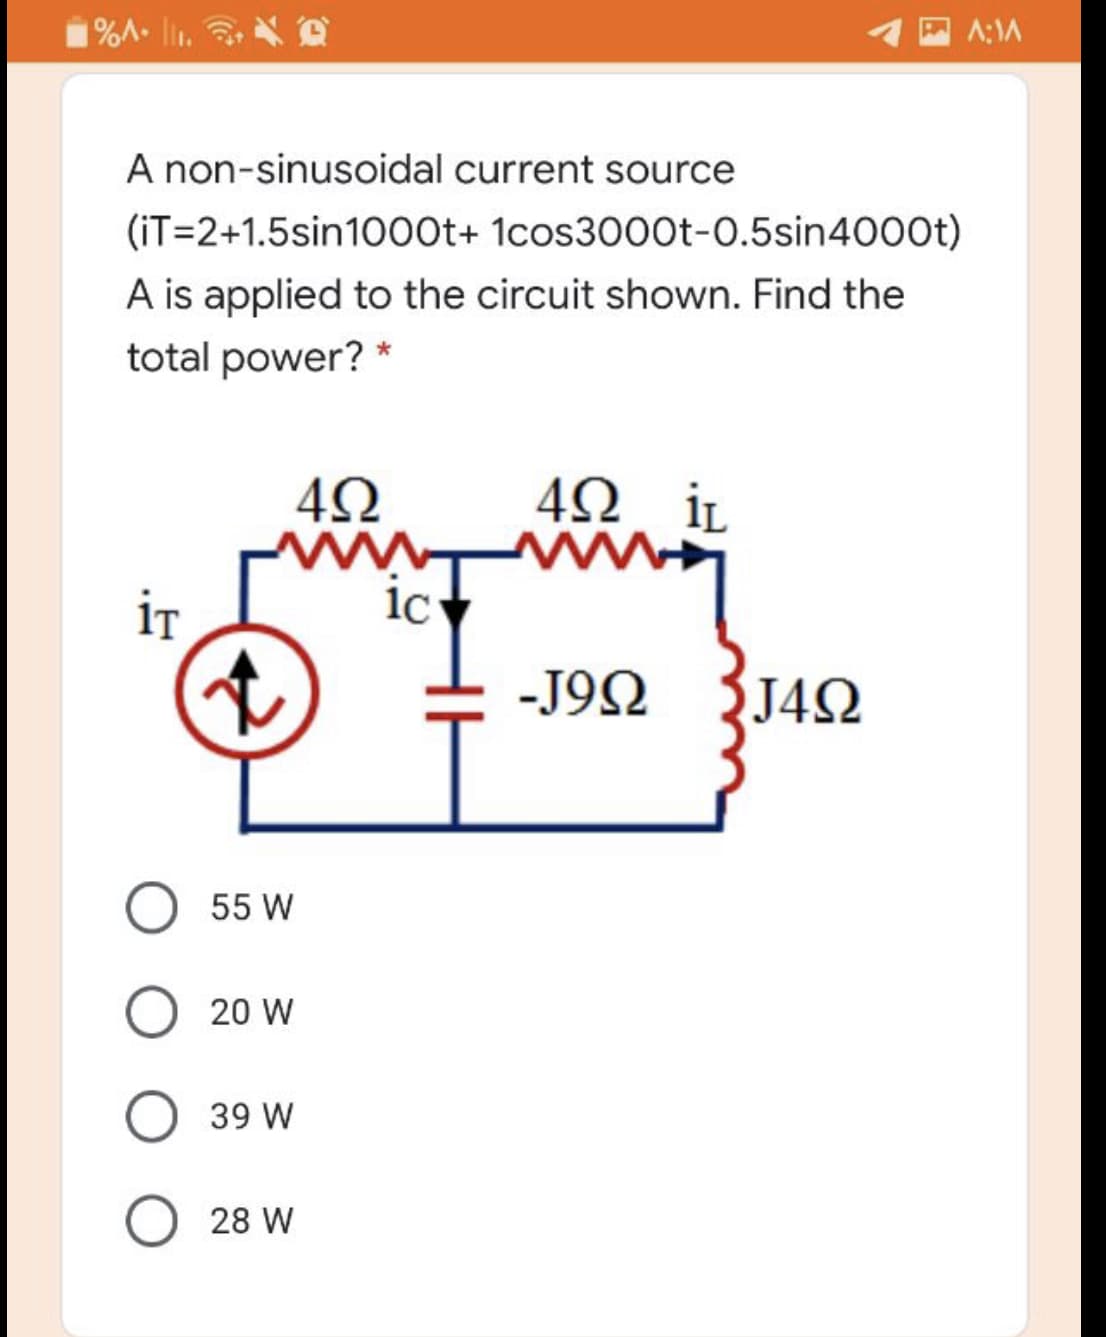 1%A- lir. D
A:1A
A non-sinusoidal current source
(iT=2+1.5sin1000t+ 1cos3000t-0.5sin4000t)
A is applied to the circuit shown. Find the
total power? *
4Ω iL
ww
1c
İT
-J9Ω J4 Ω
55 W
O 20 W
O 39 W
O 28 W
